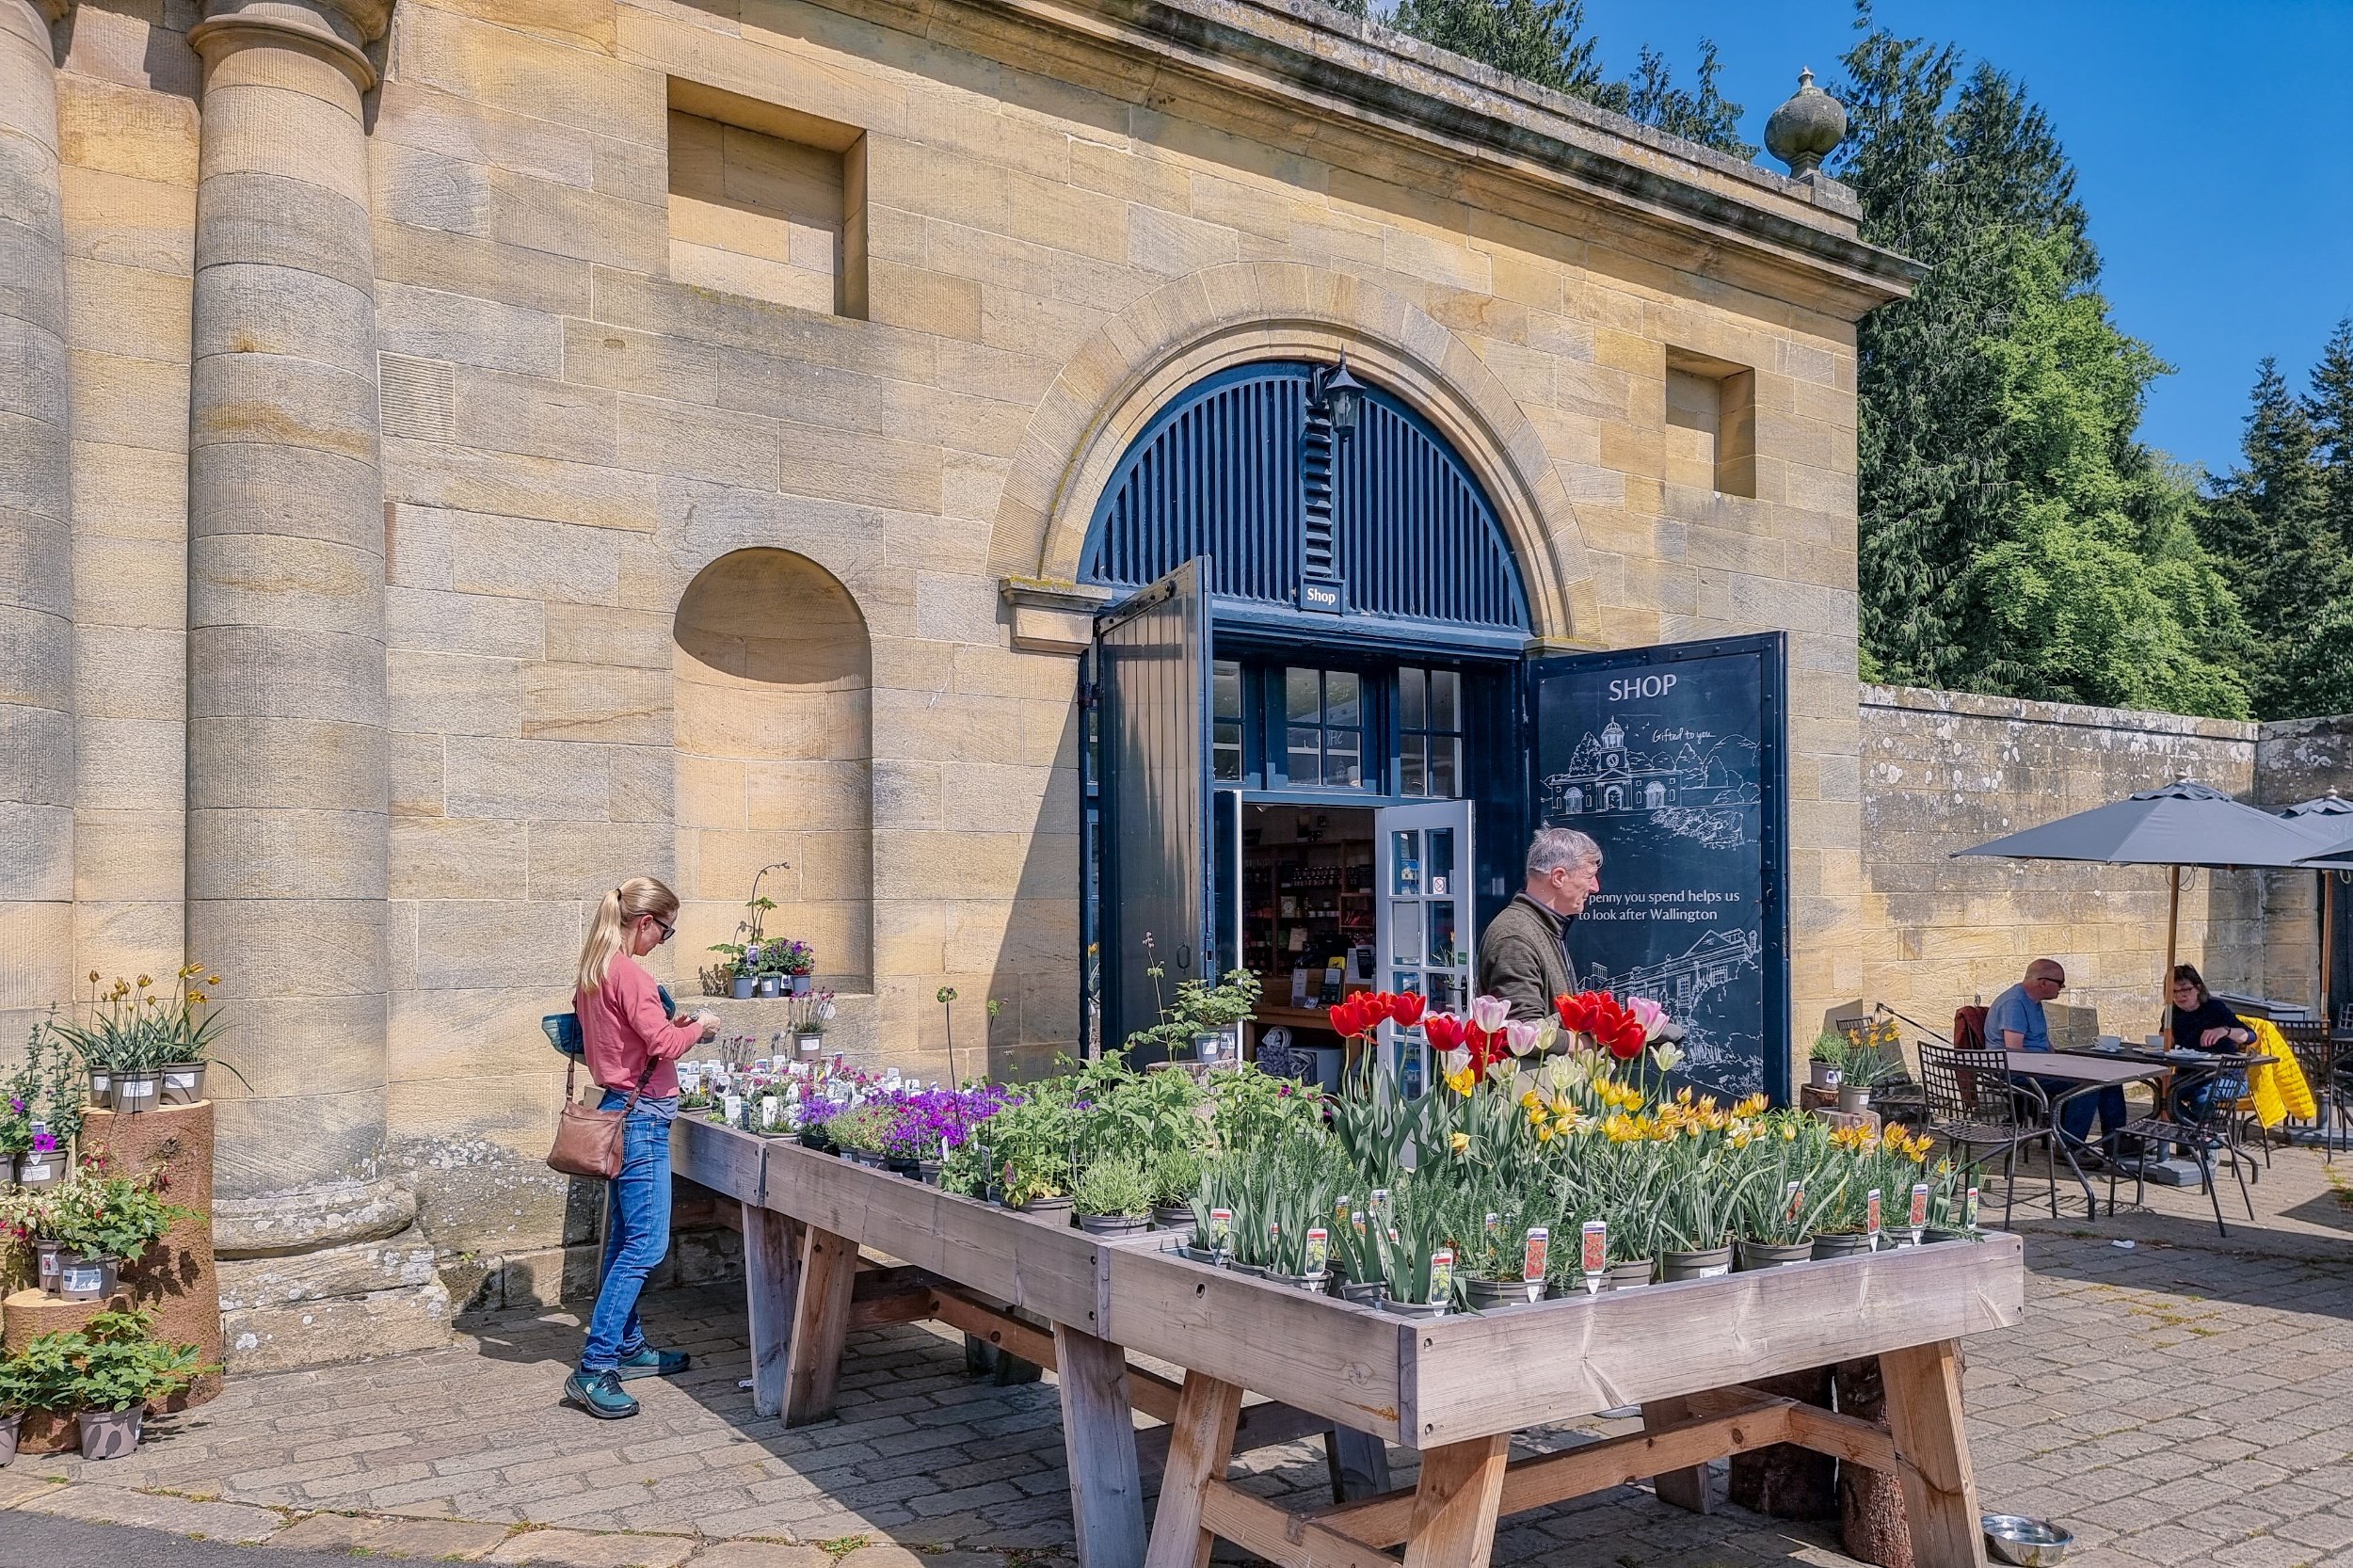 An image showing the clocktower shop with flowers for sale outside and some tables for eating food from the café.